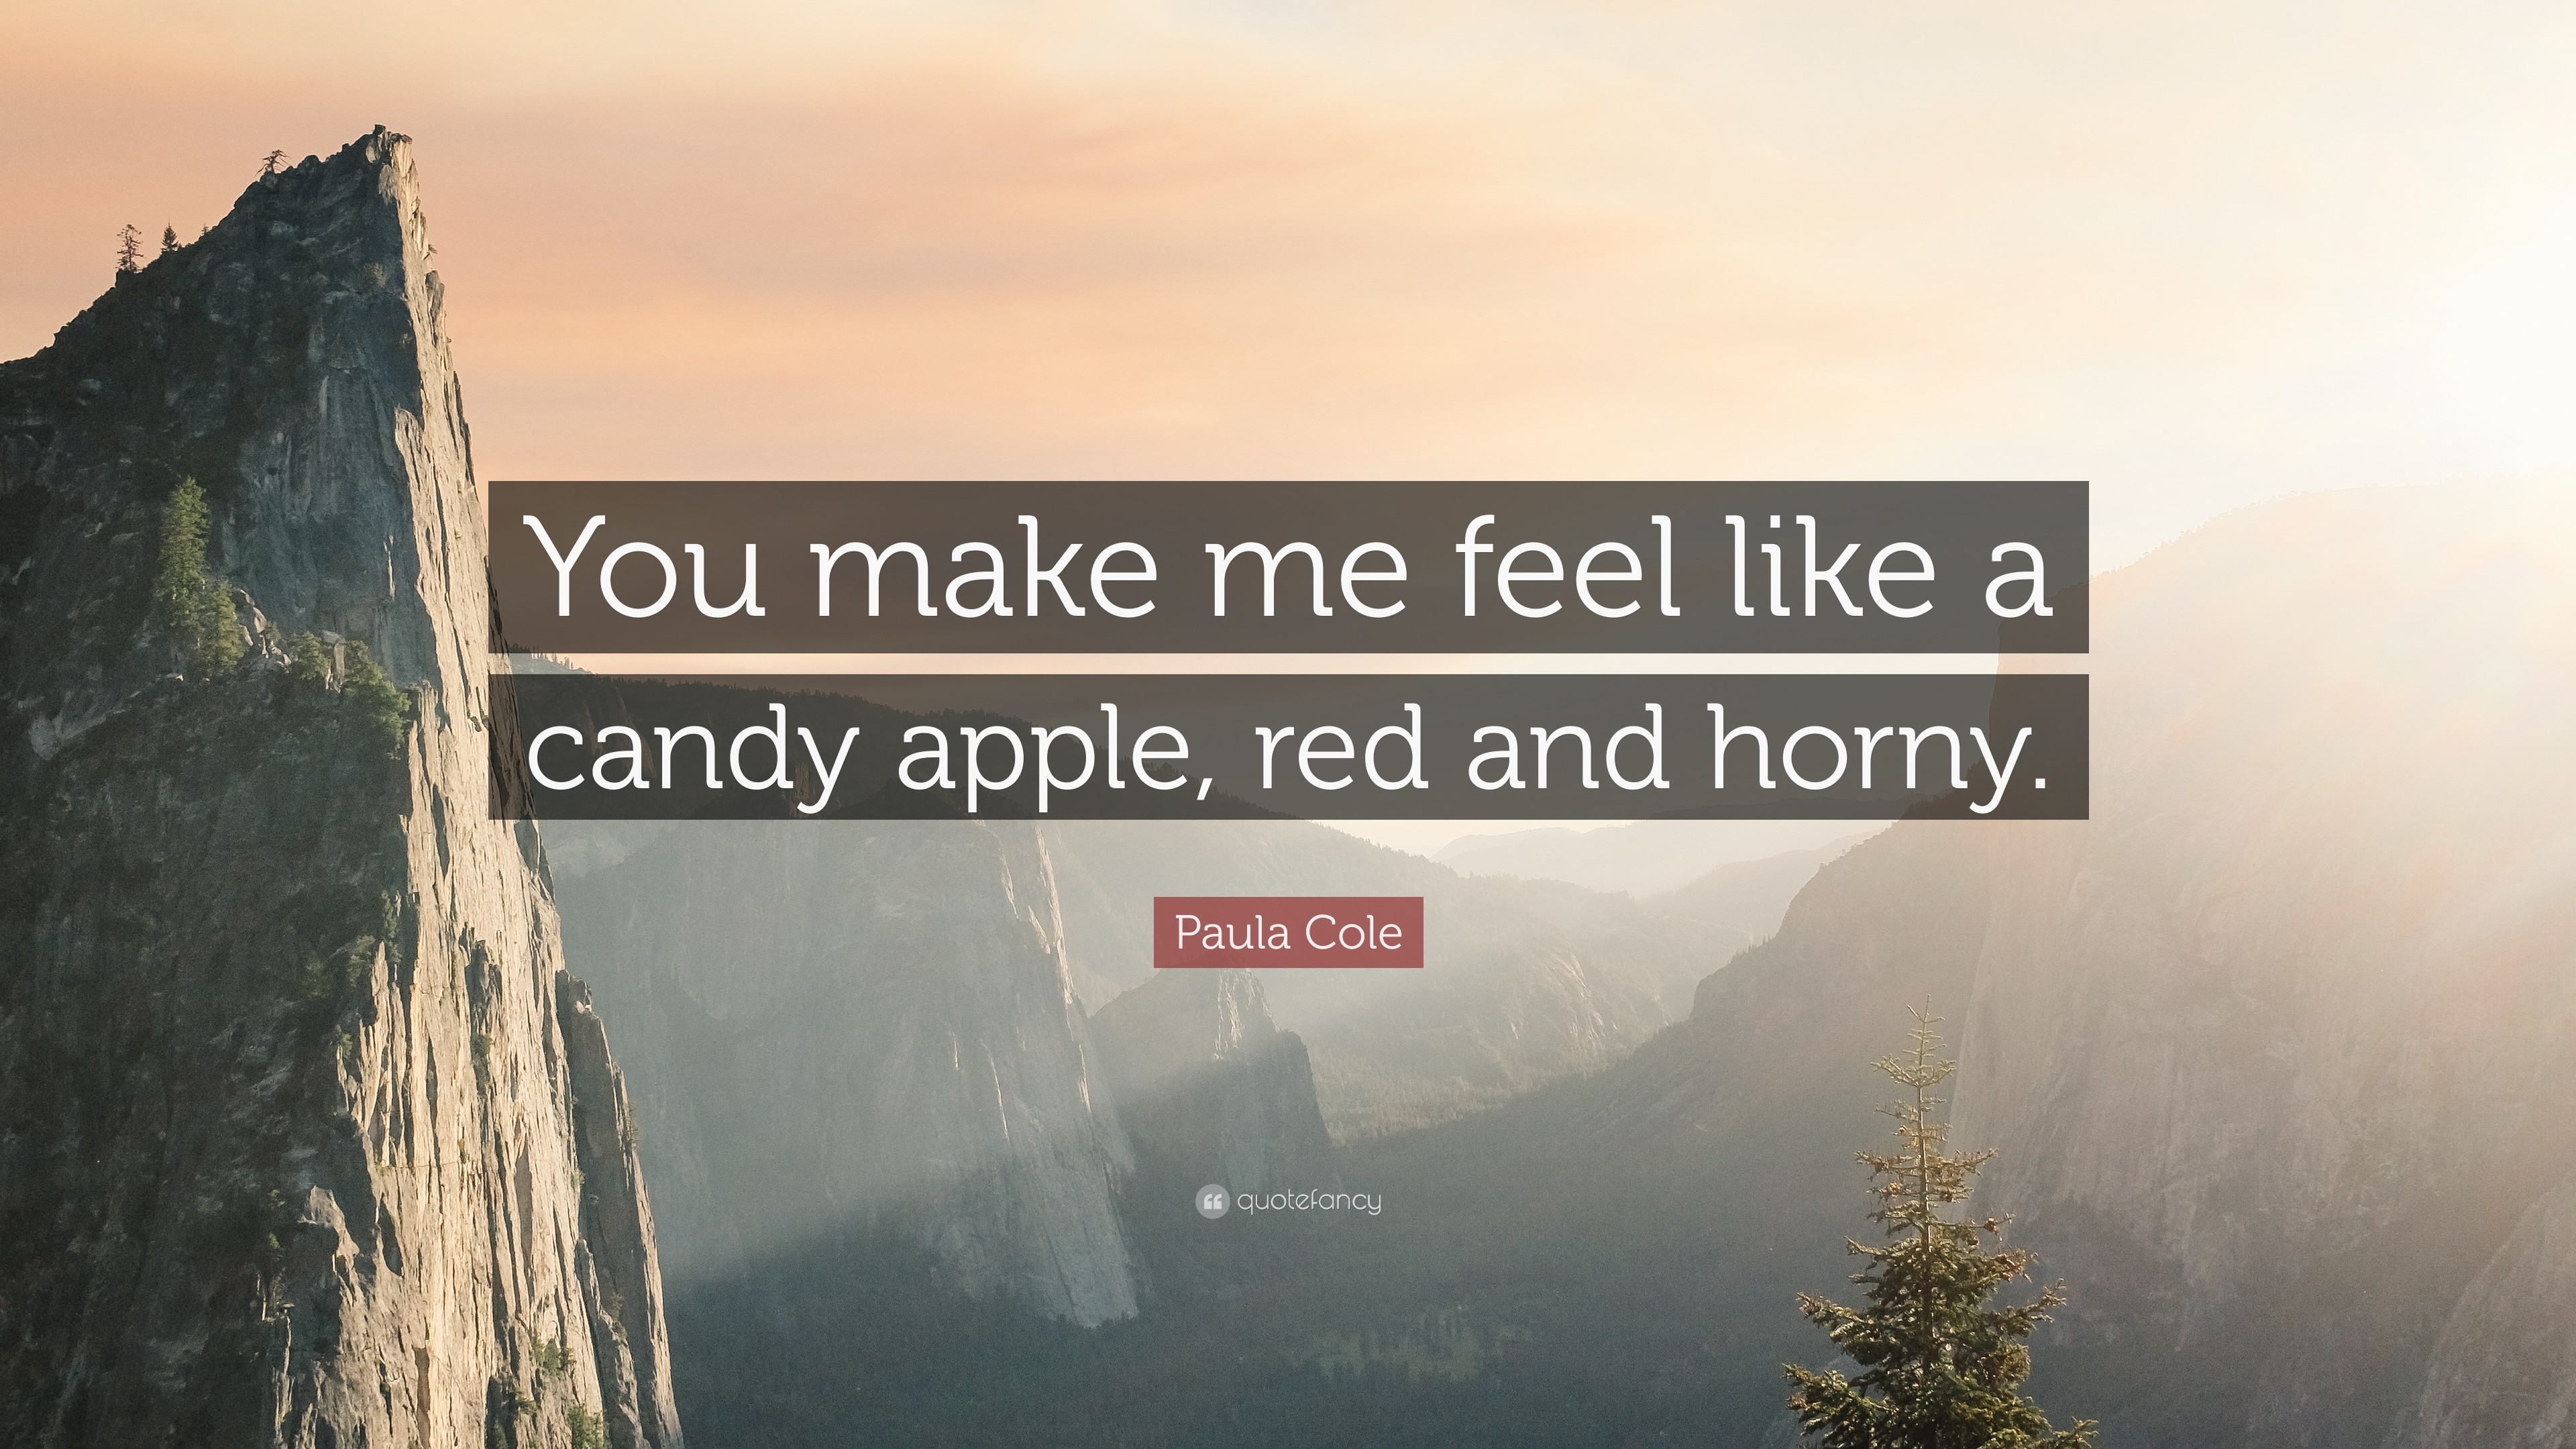 3840x2160 Paula Cole Quote: “You make me feel like a candy apple, red and